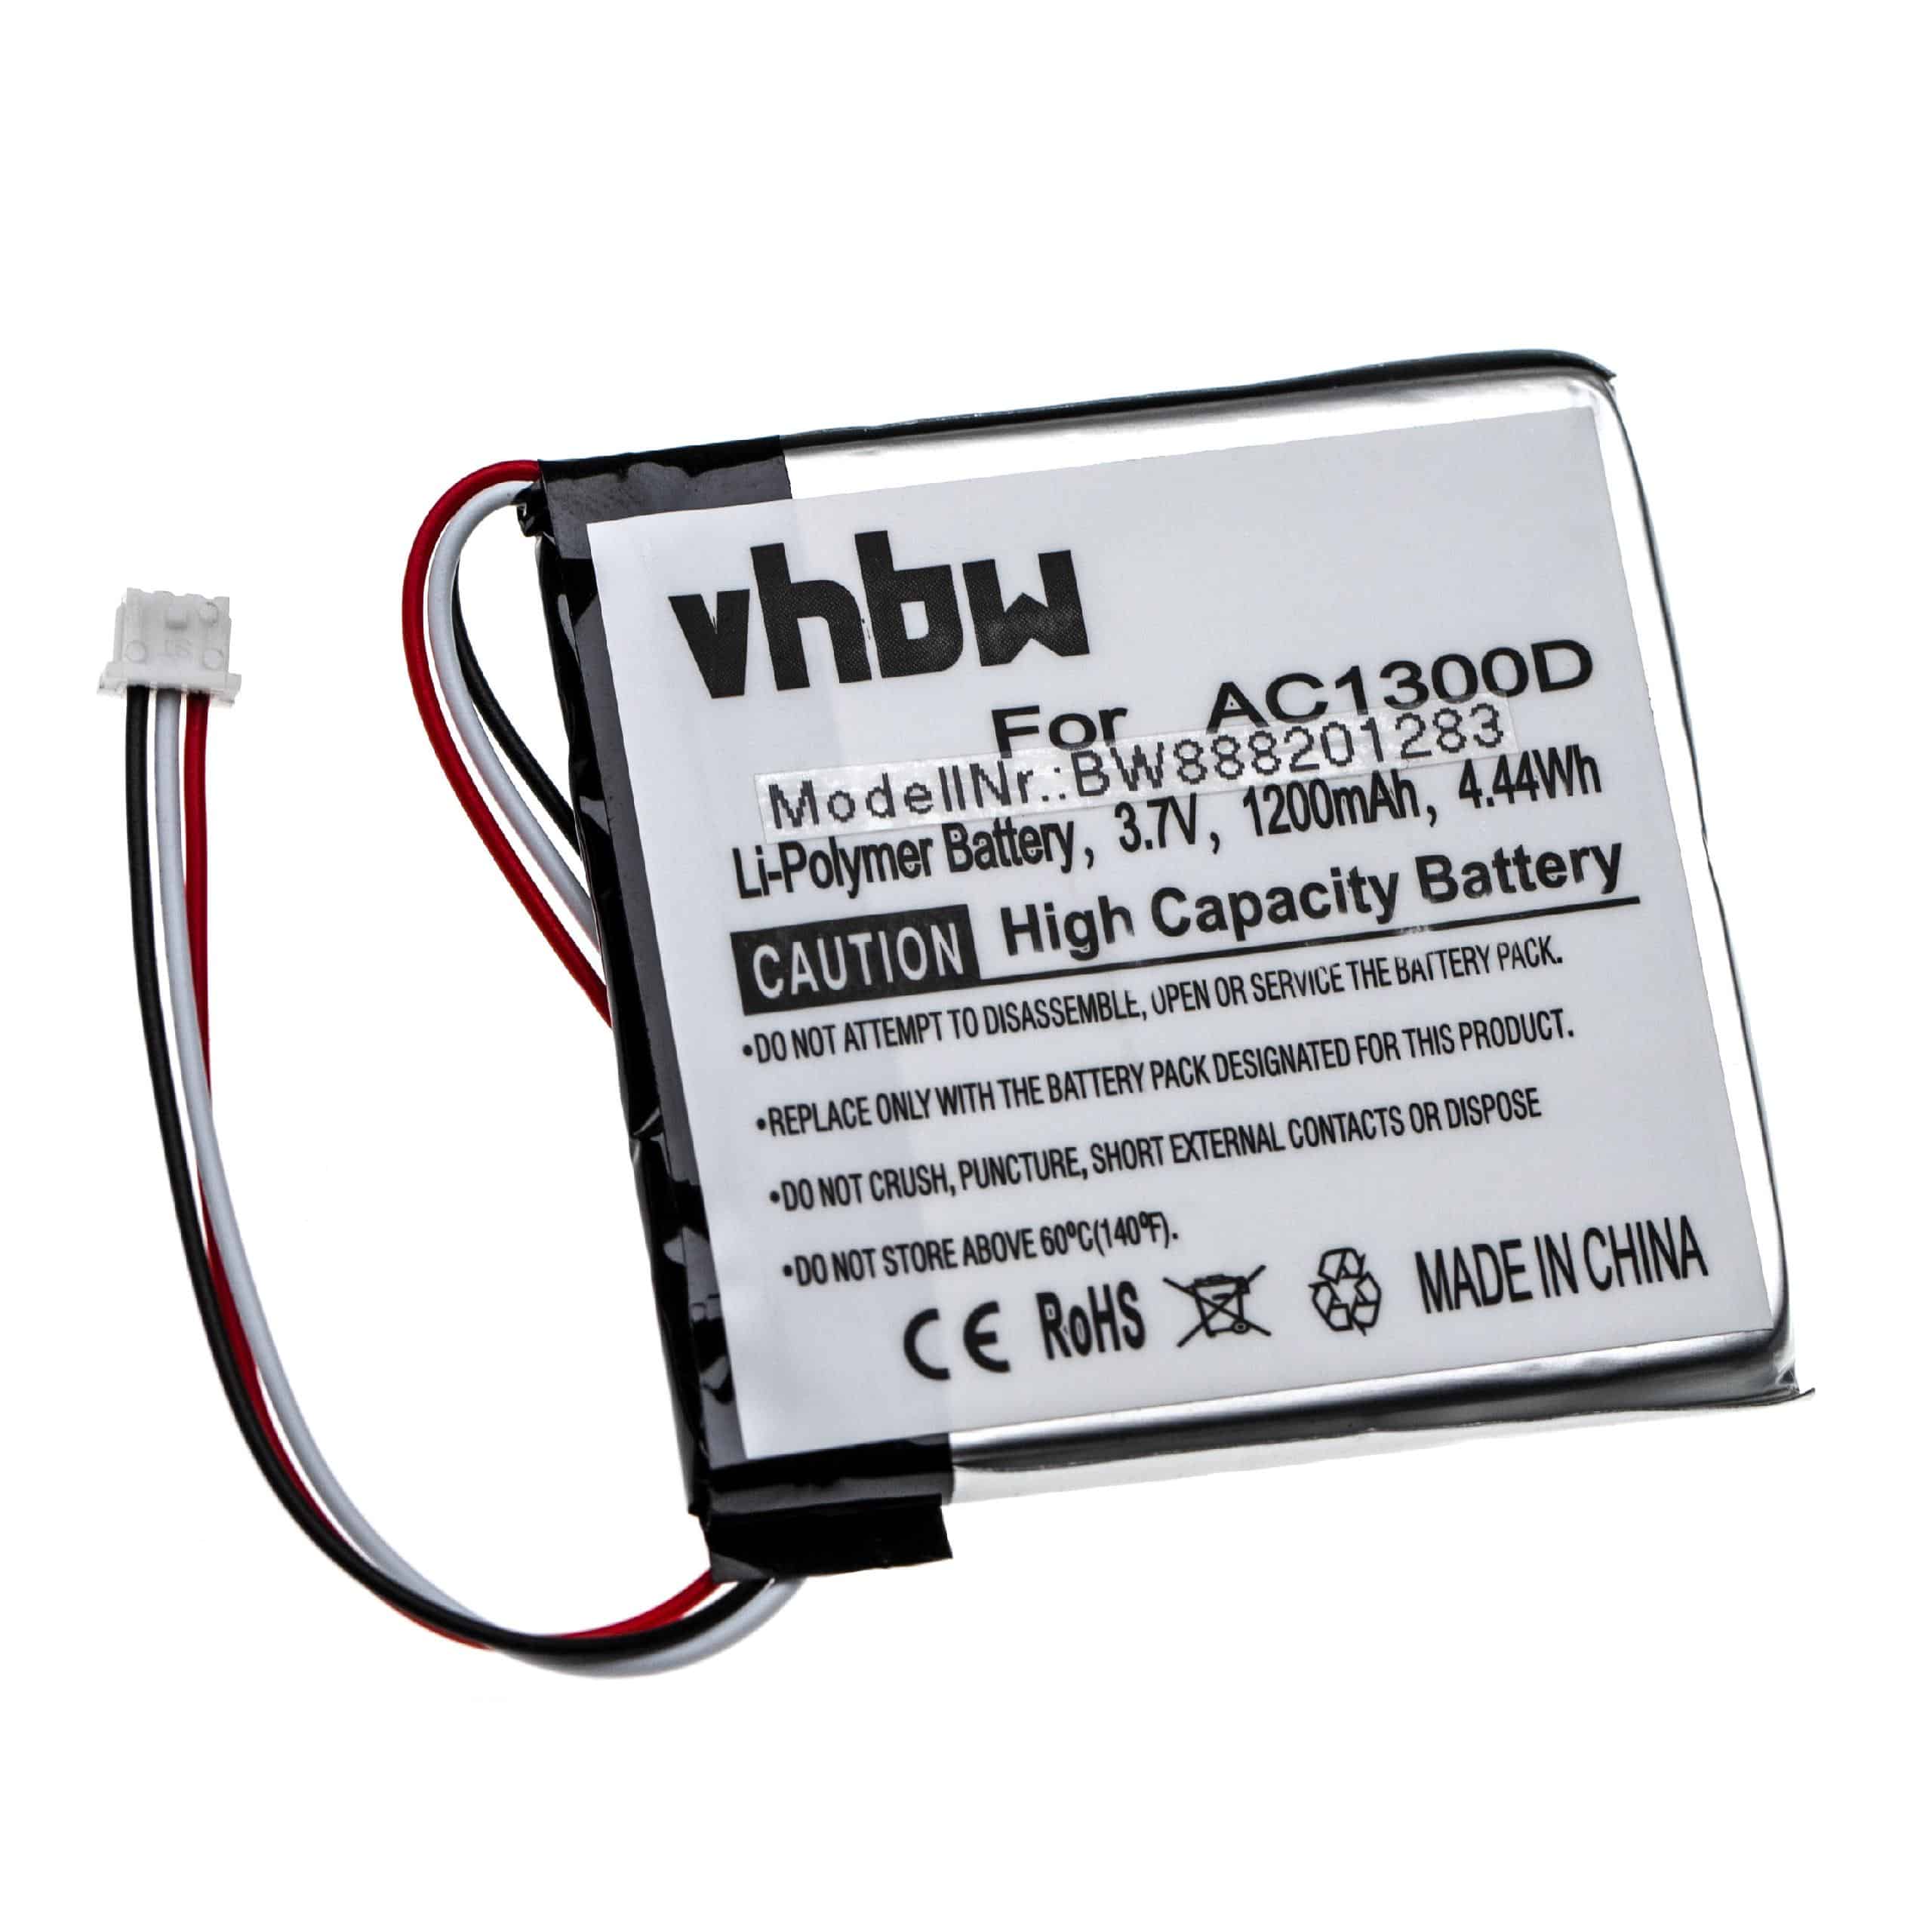 Baby Monitor Battery for Angelcare AC1300-D parent unit, AC1300 parent unit, AC1320 parent unit - 1200mAh 3.7V